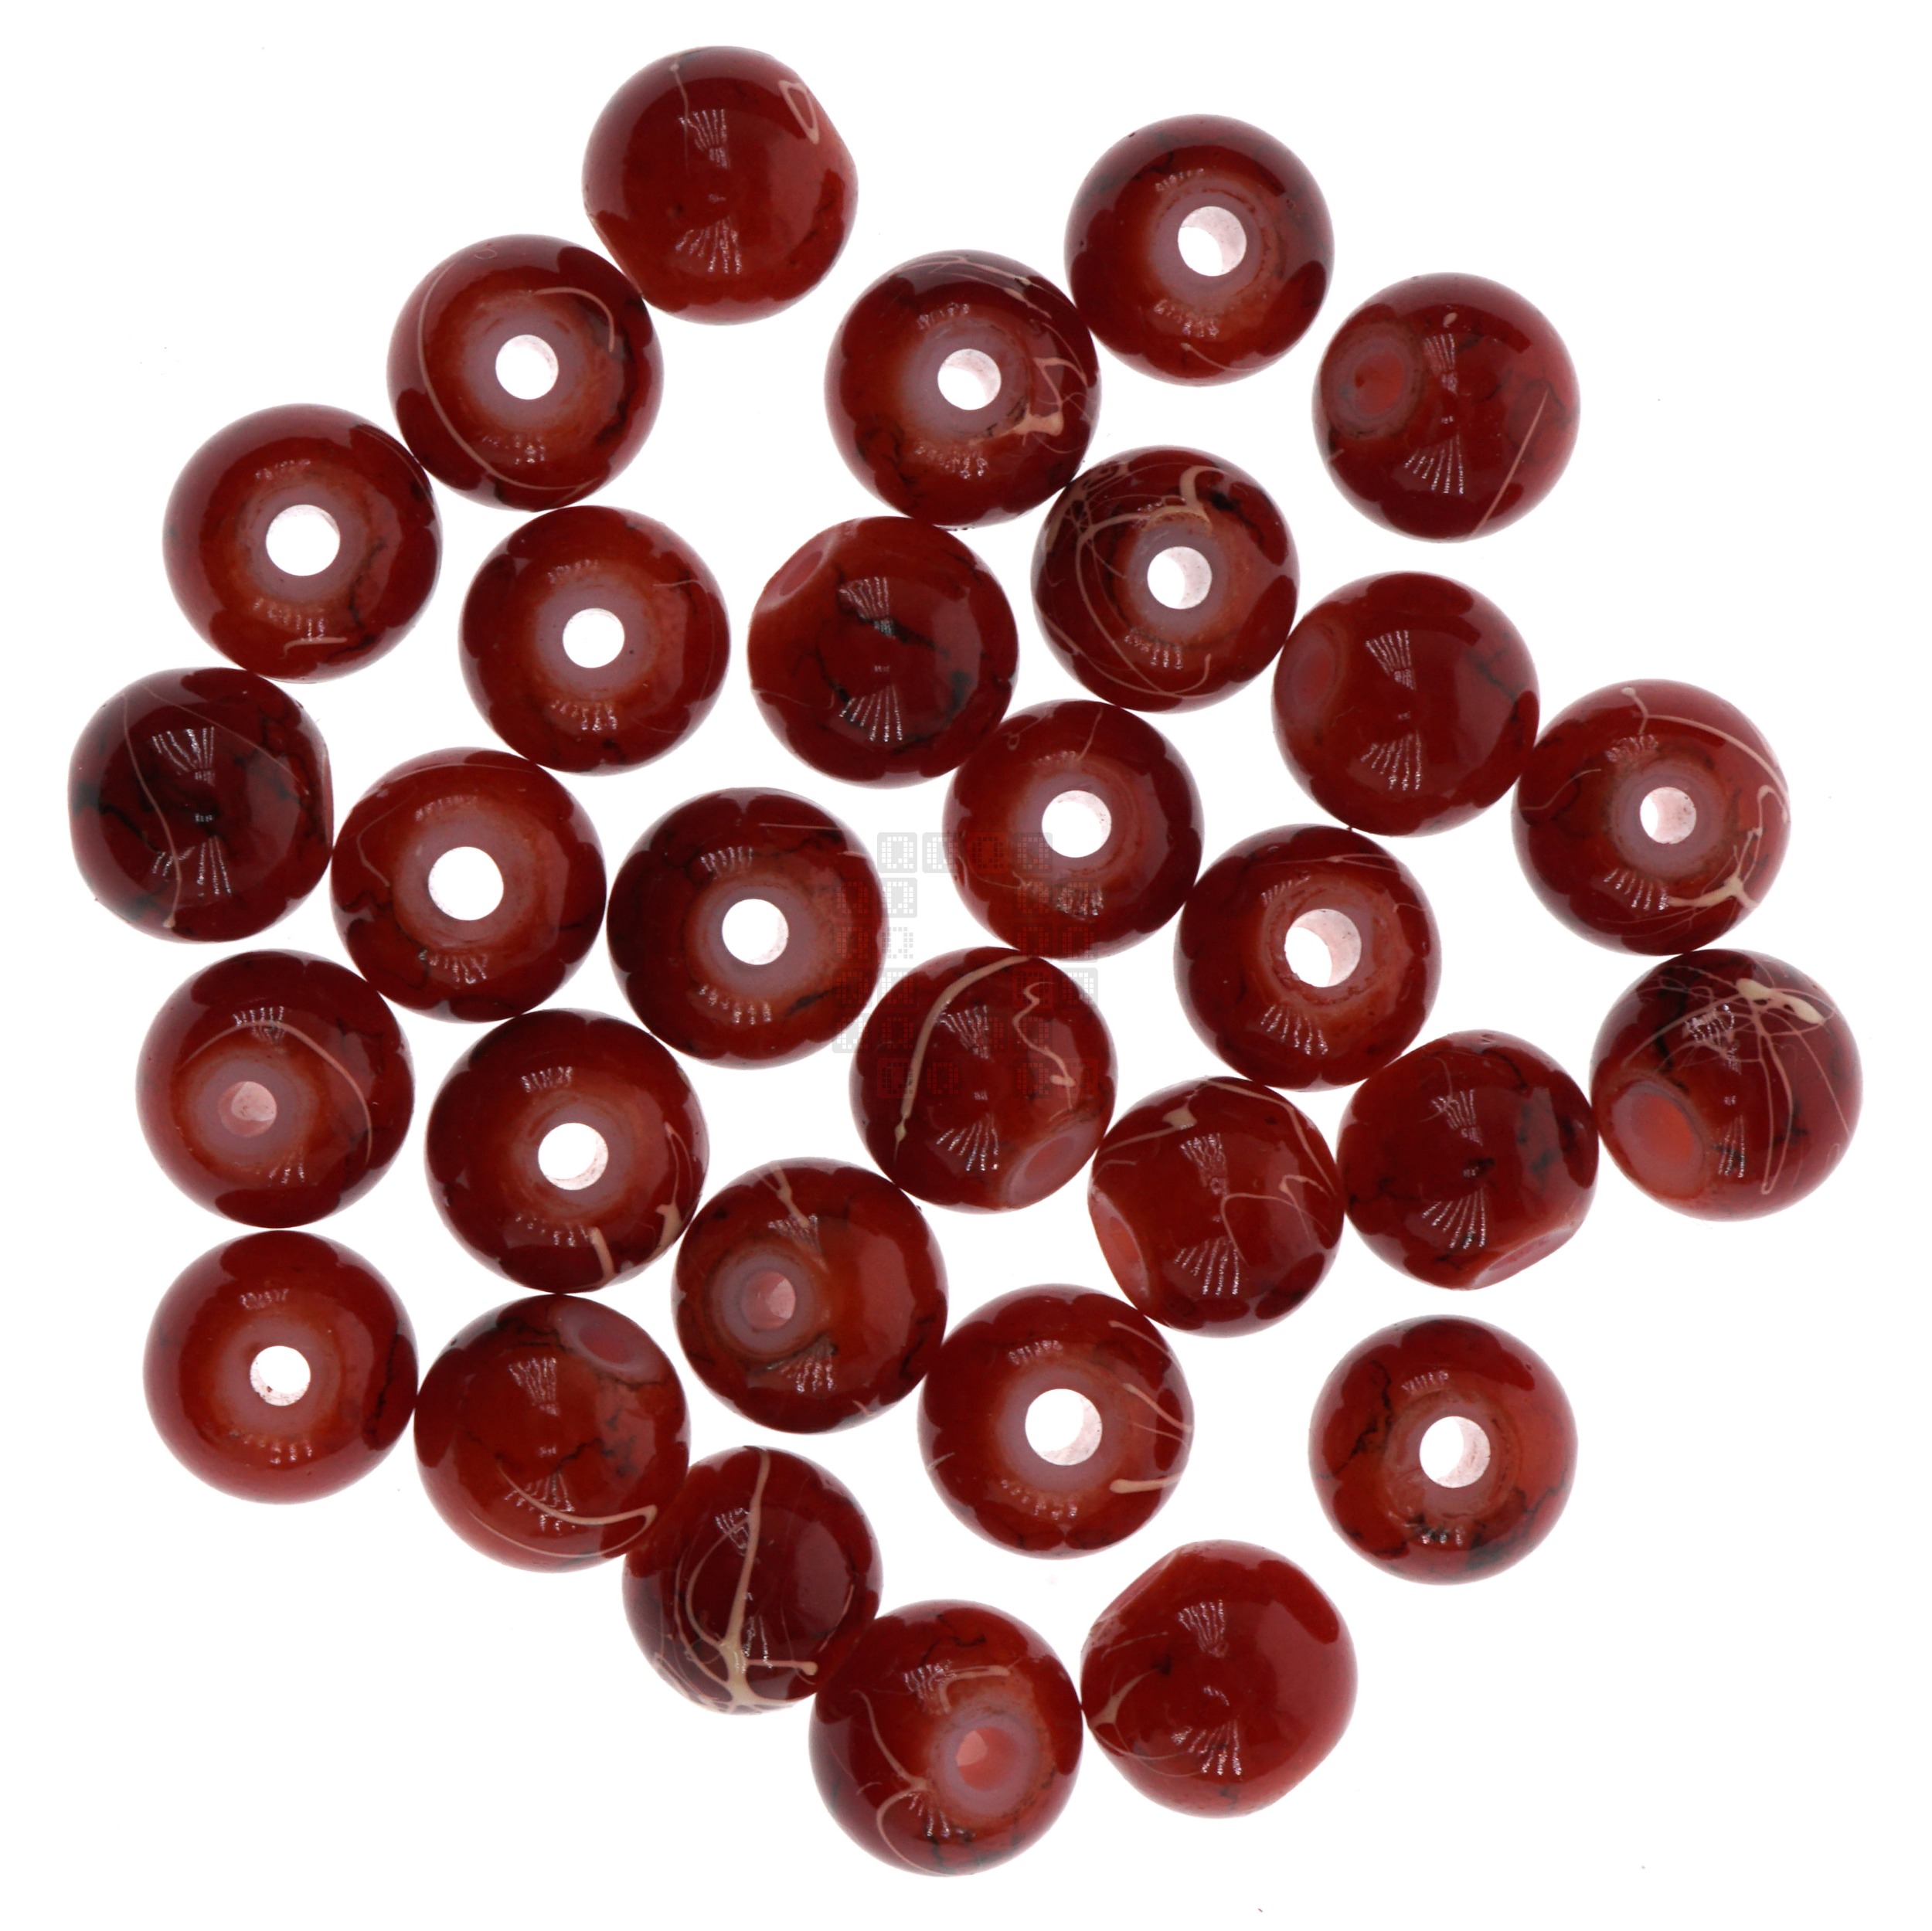 Cherry Red 8mm Loose Glass Beads, 30 Pieces